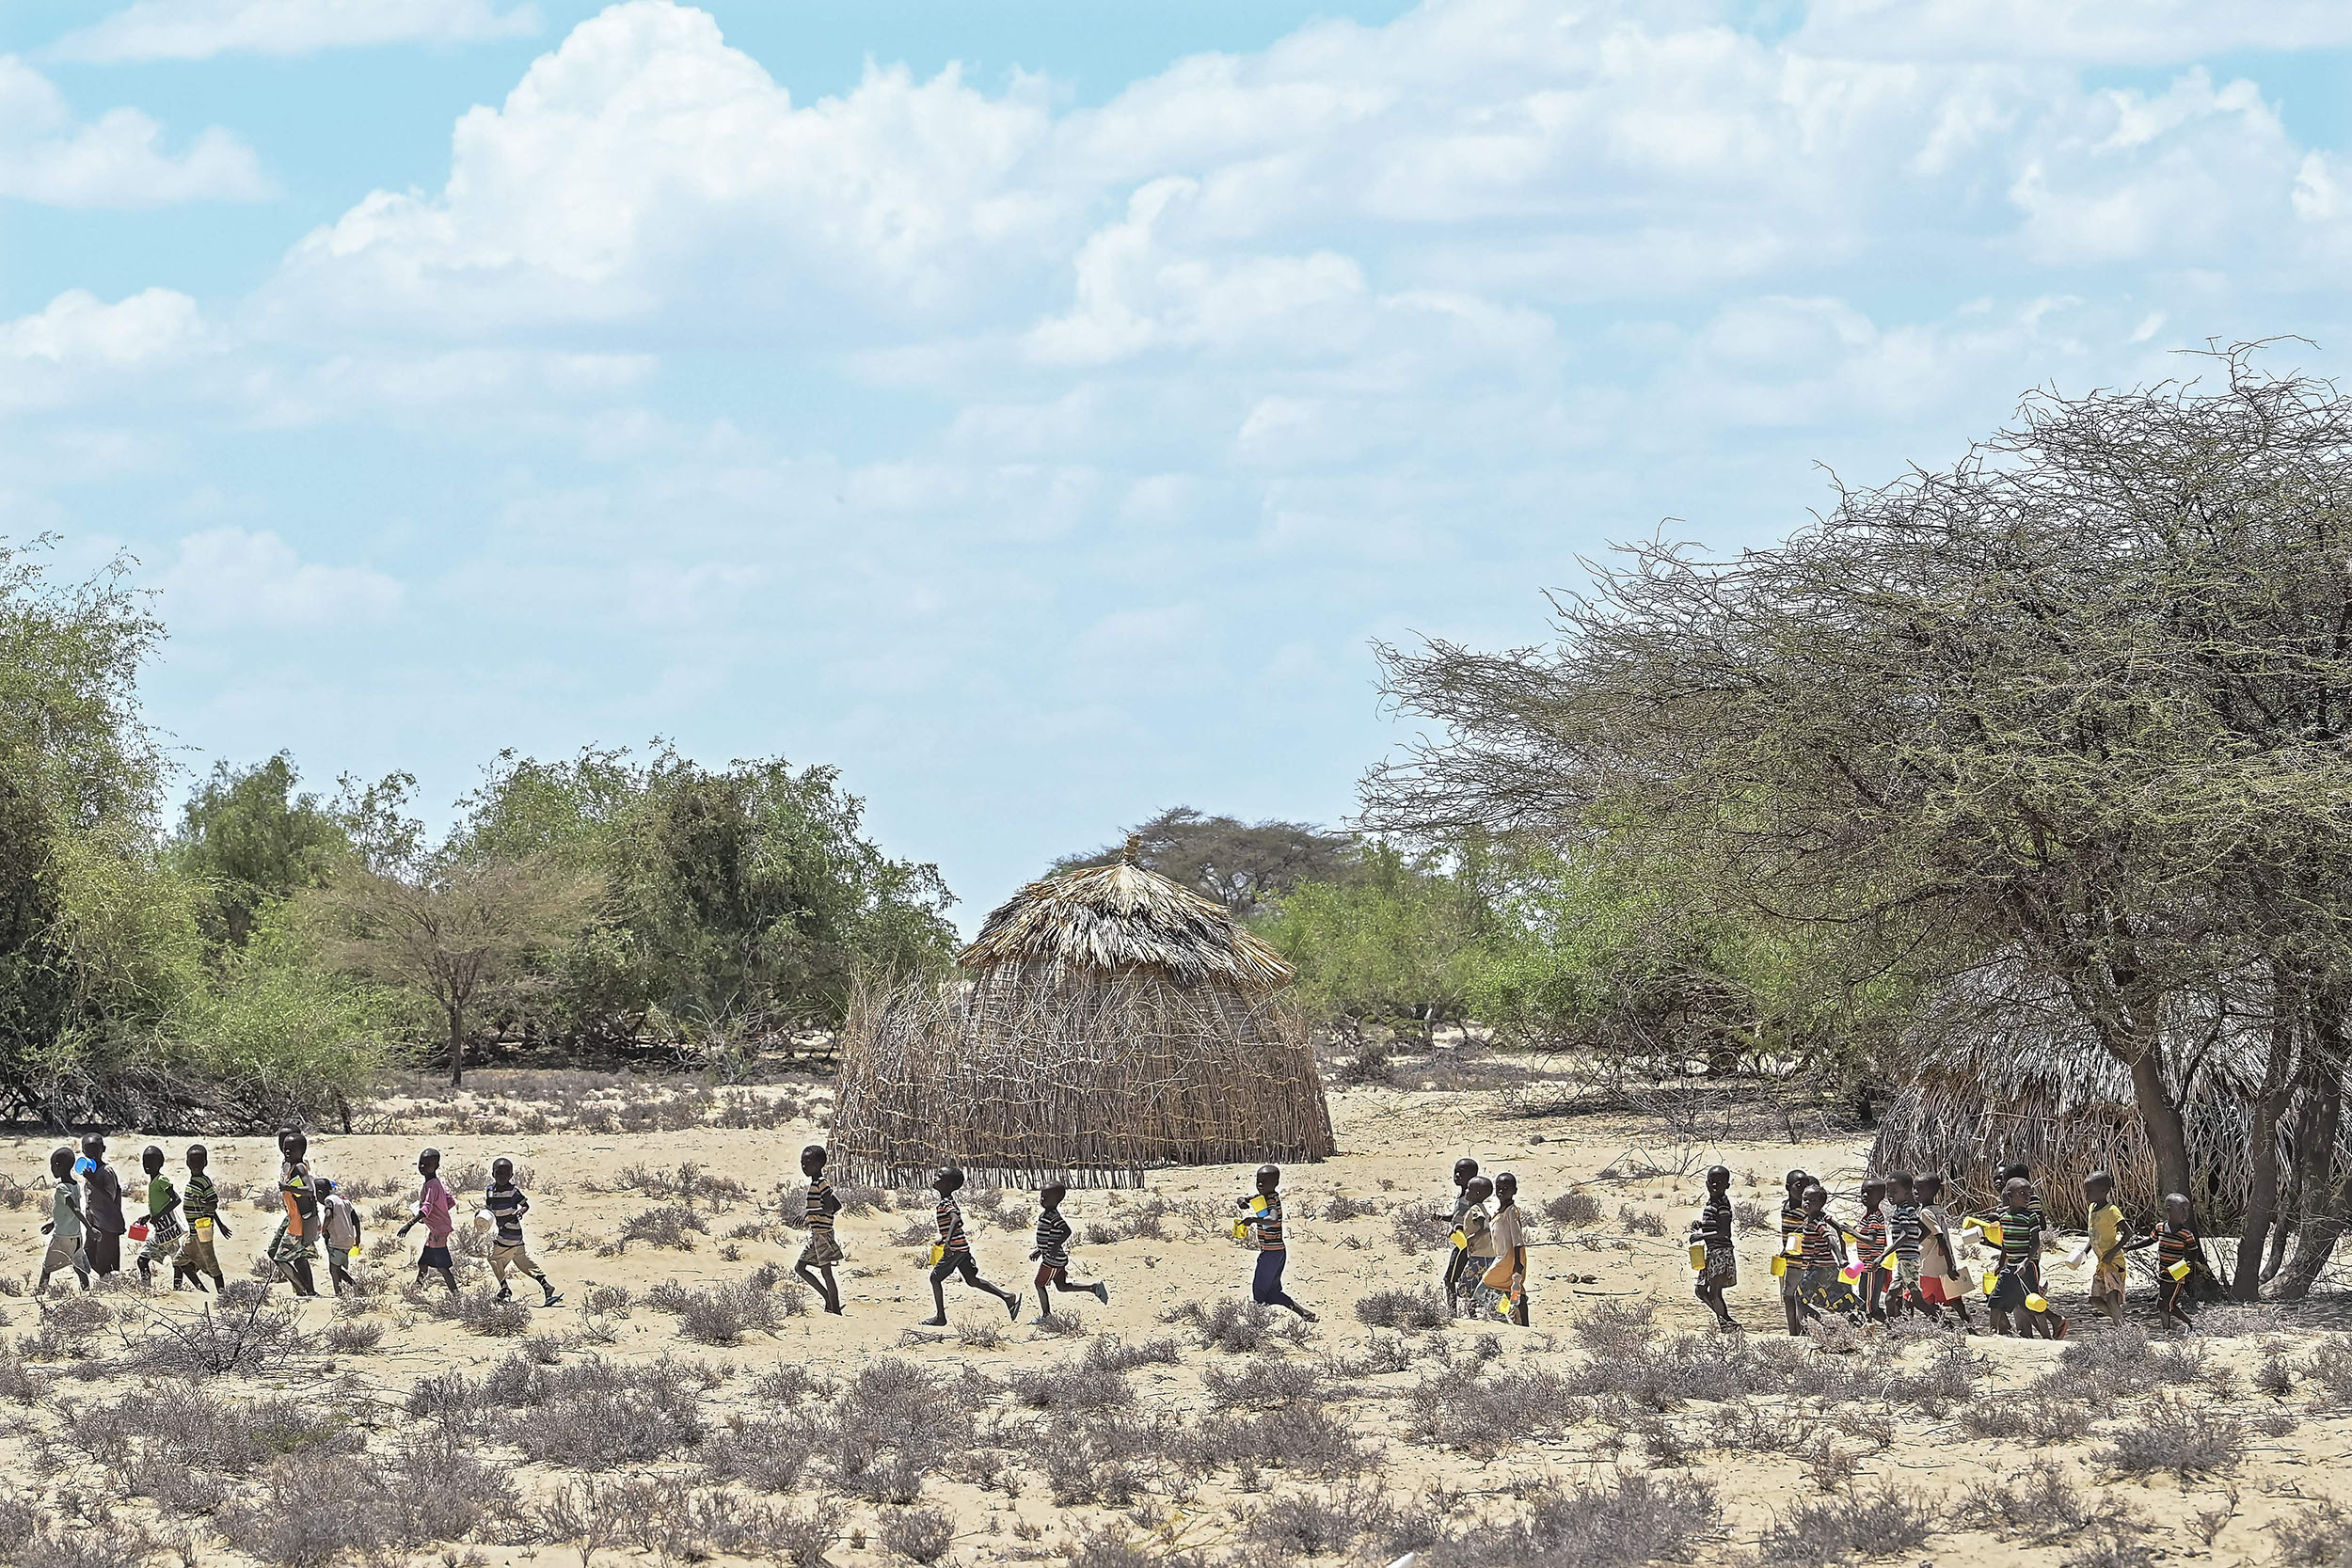 Children run and walk in a line through barren land on a sunny day.